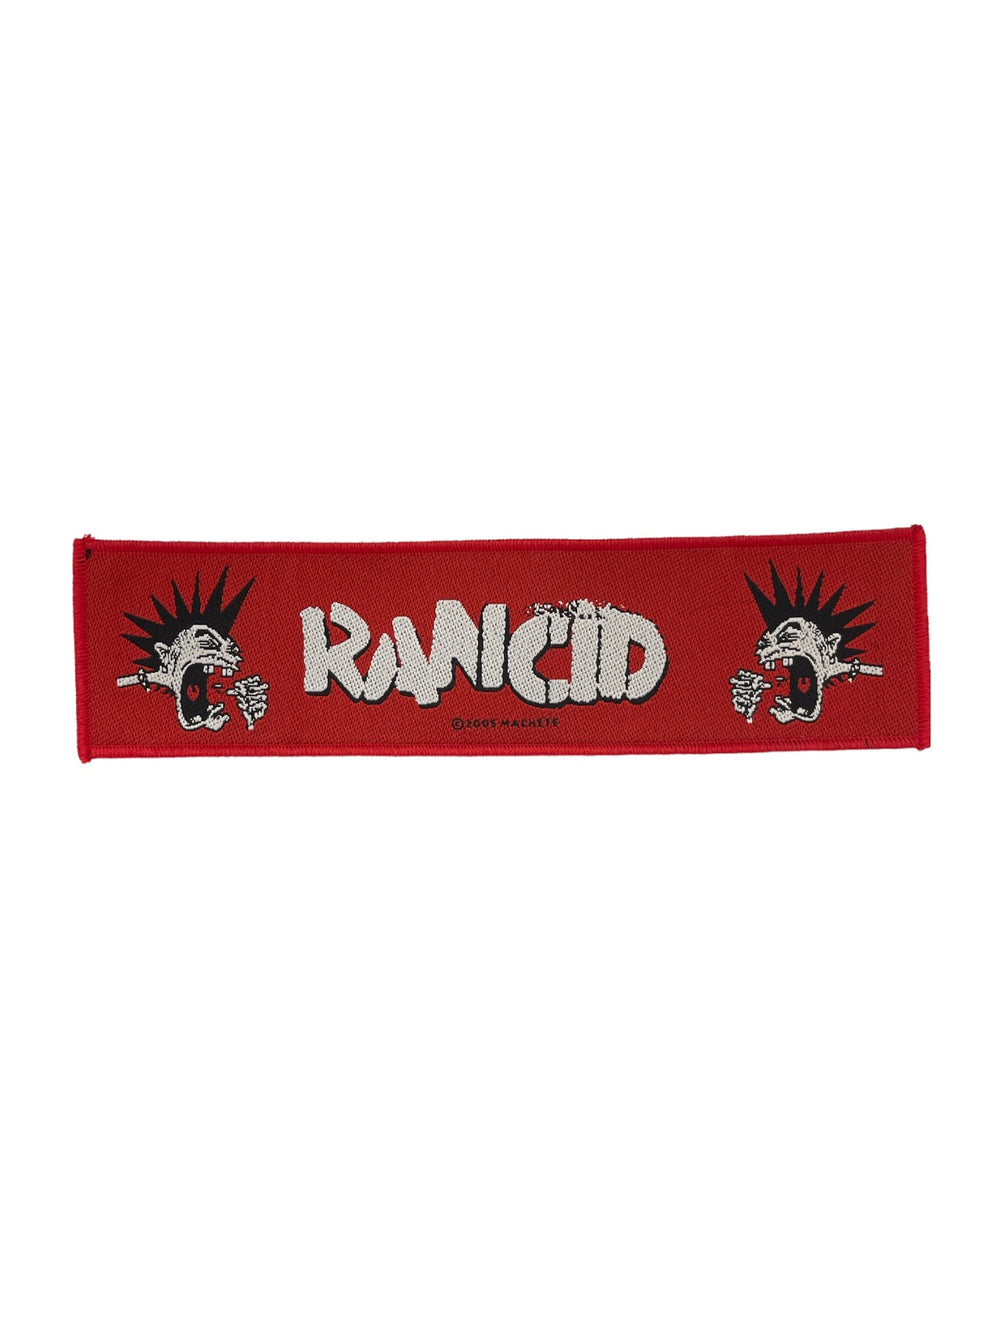 Rancid Super Strip Patch: Mohawk Official Woven Patch Brand New